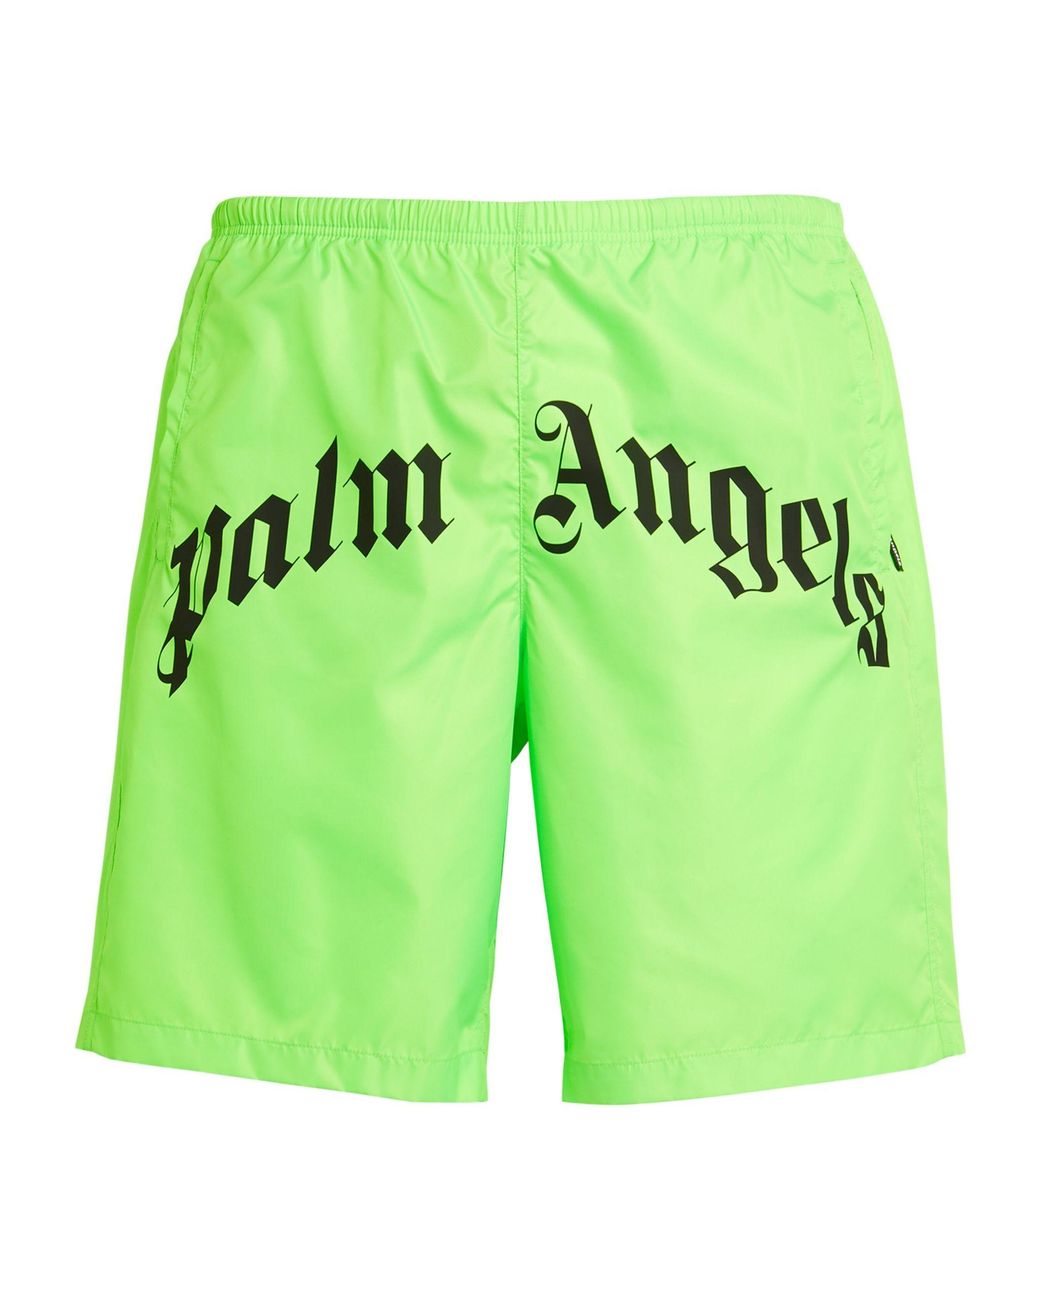 Palm Angels Synthetic Logo Swim Shorts in Green for Men - Lyst